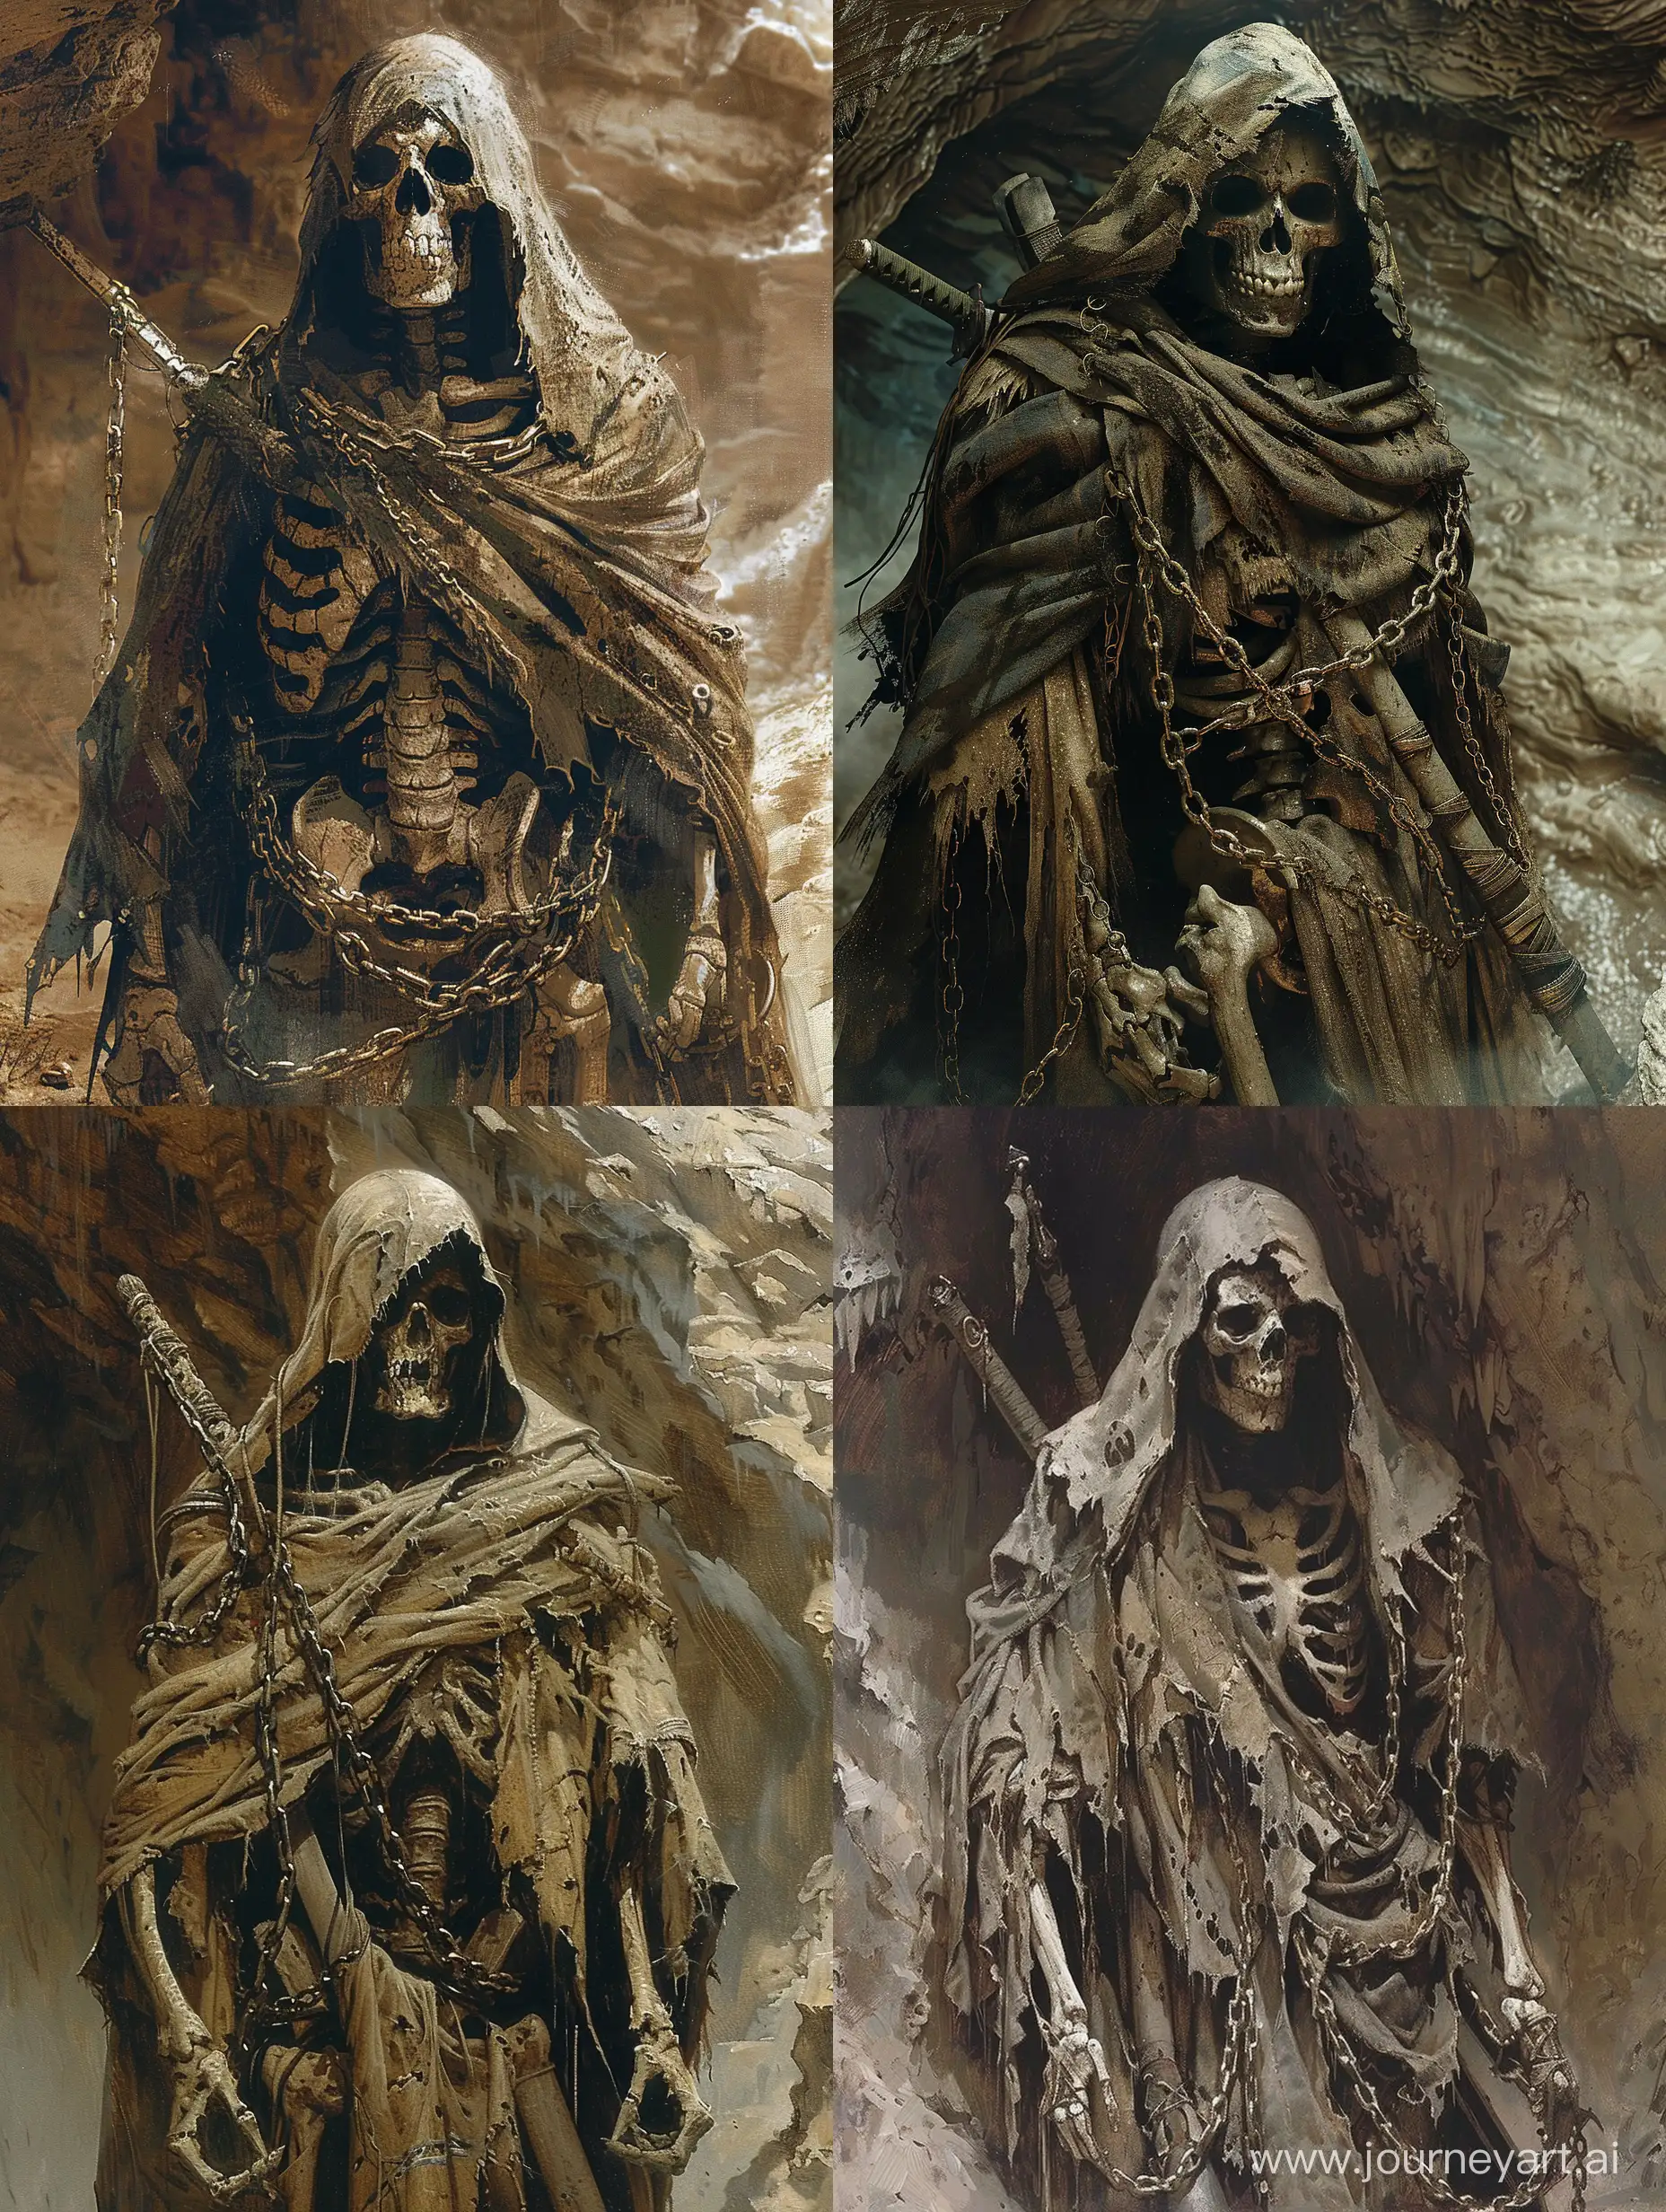 Ethereal-Skeleton-Warrior-in-Tattered-Robes-and-Chains